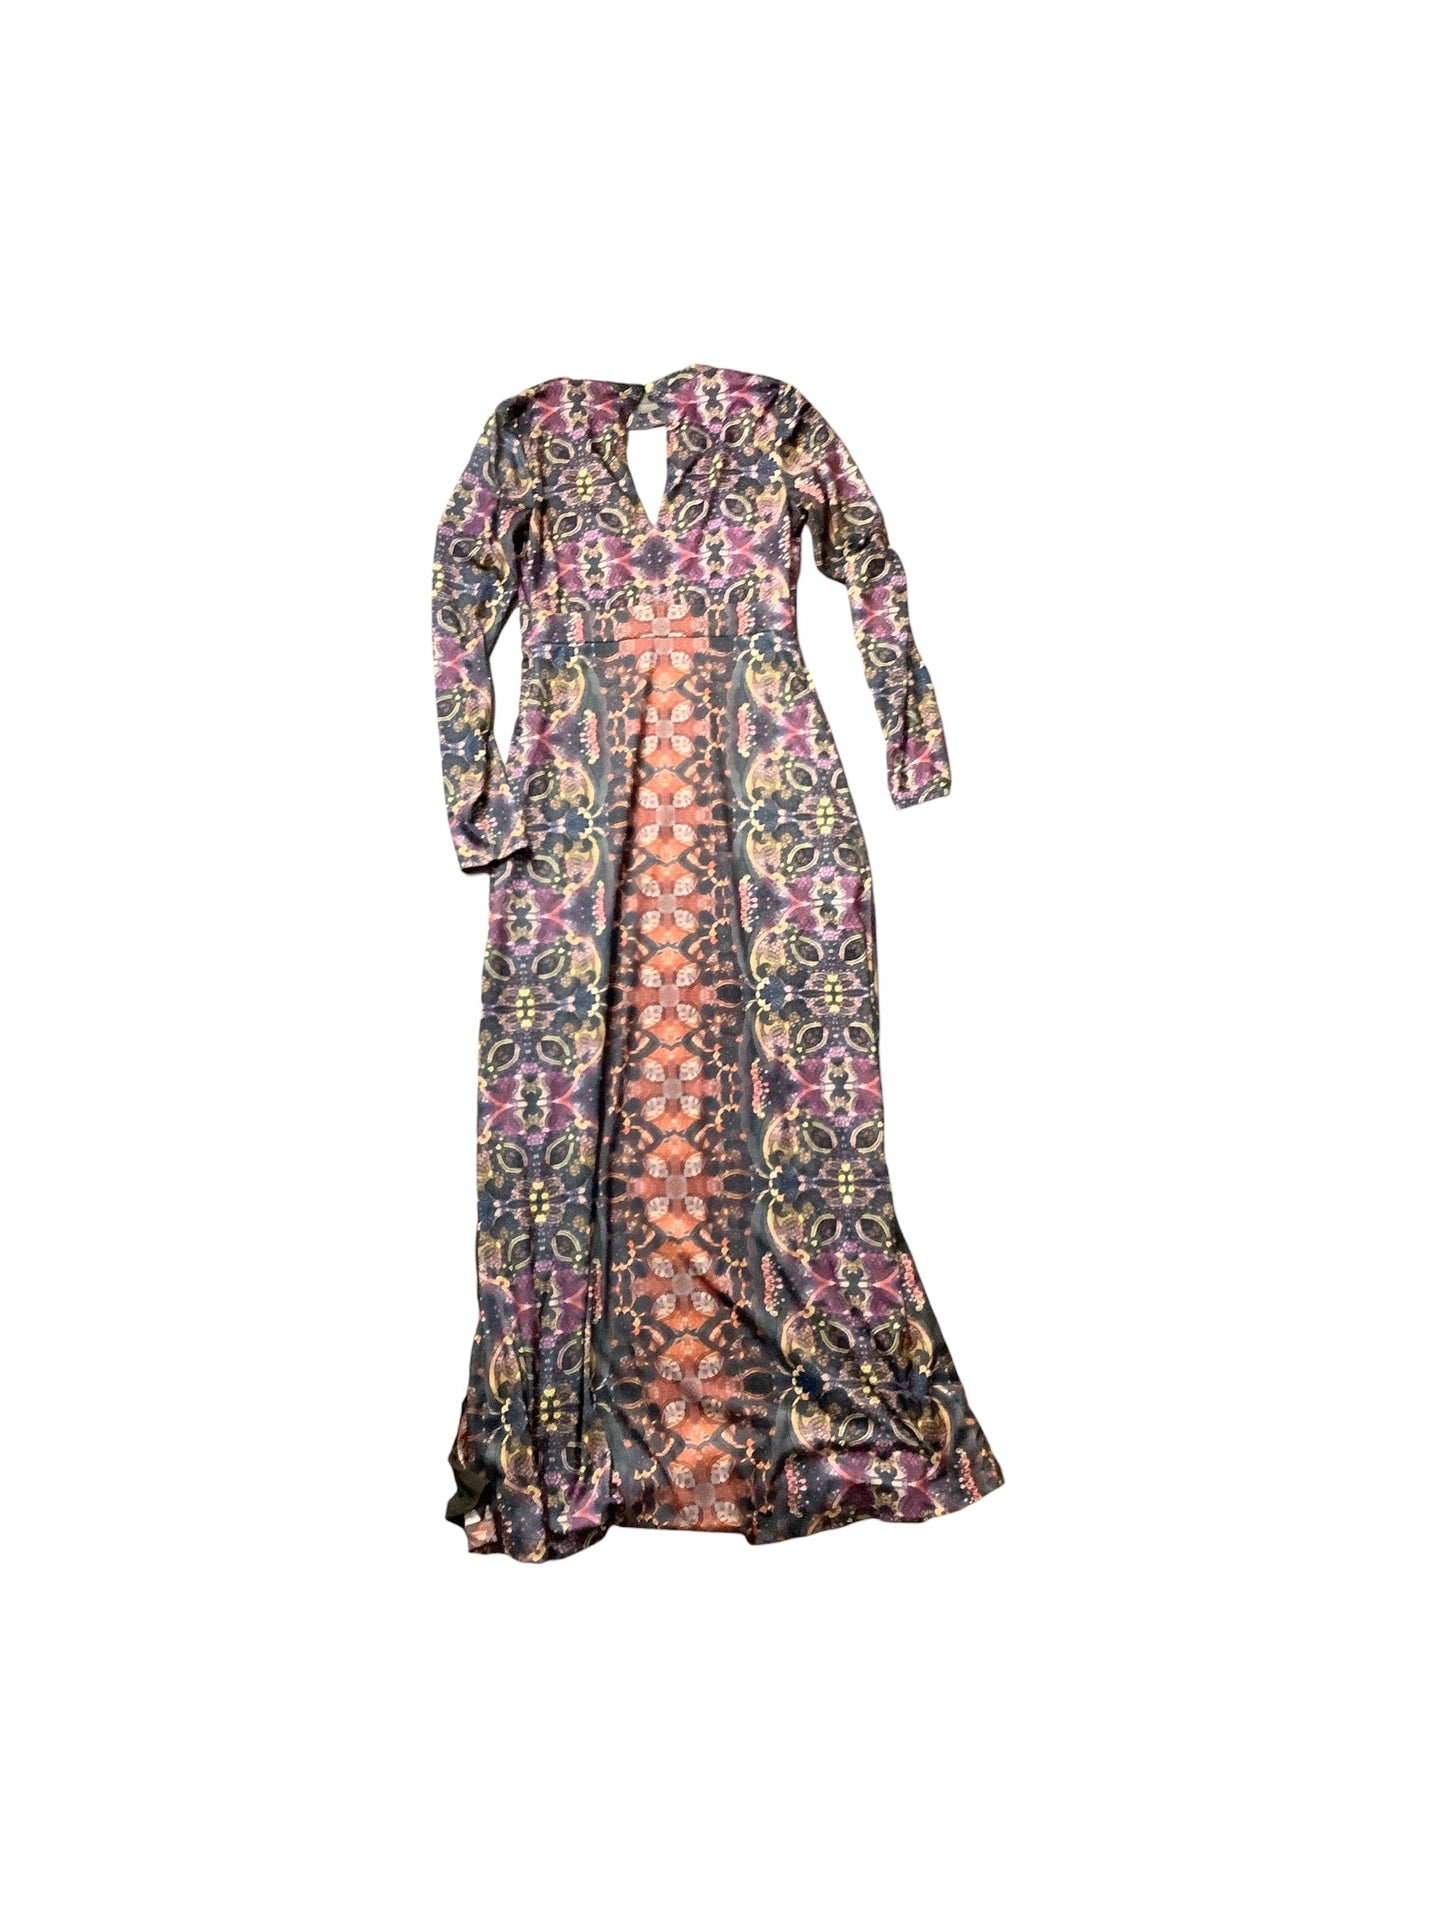 Multi-colored Dress Casual Maxi Free People, Size S